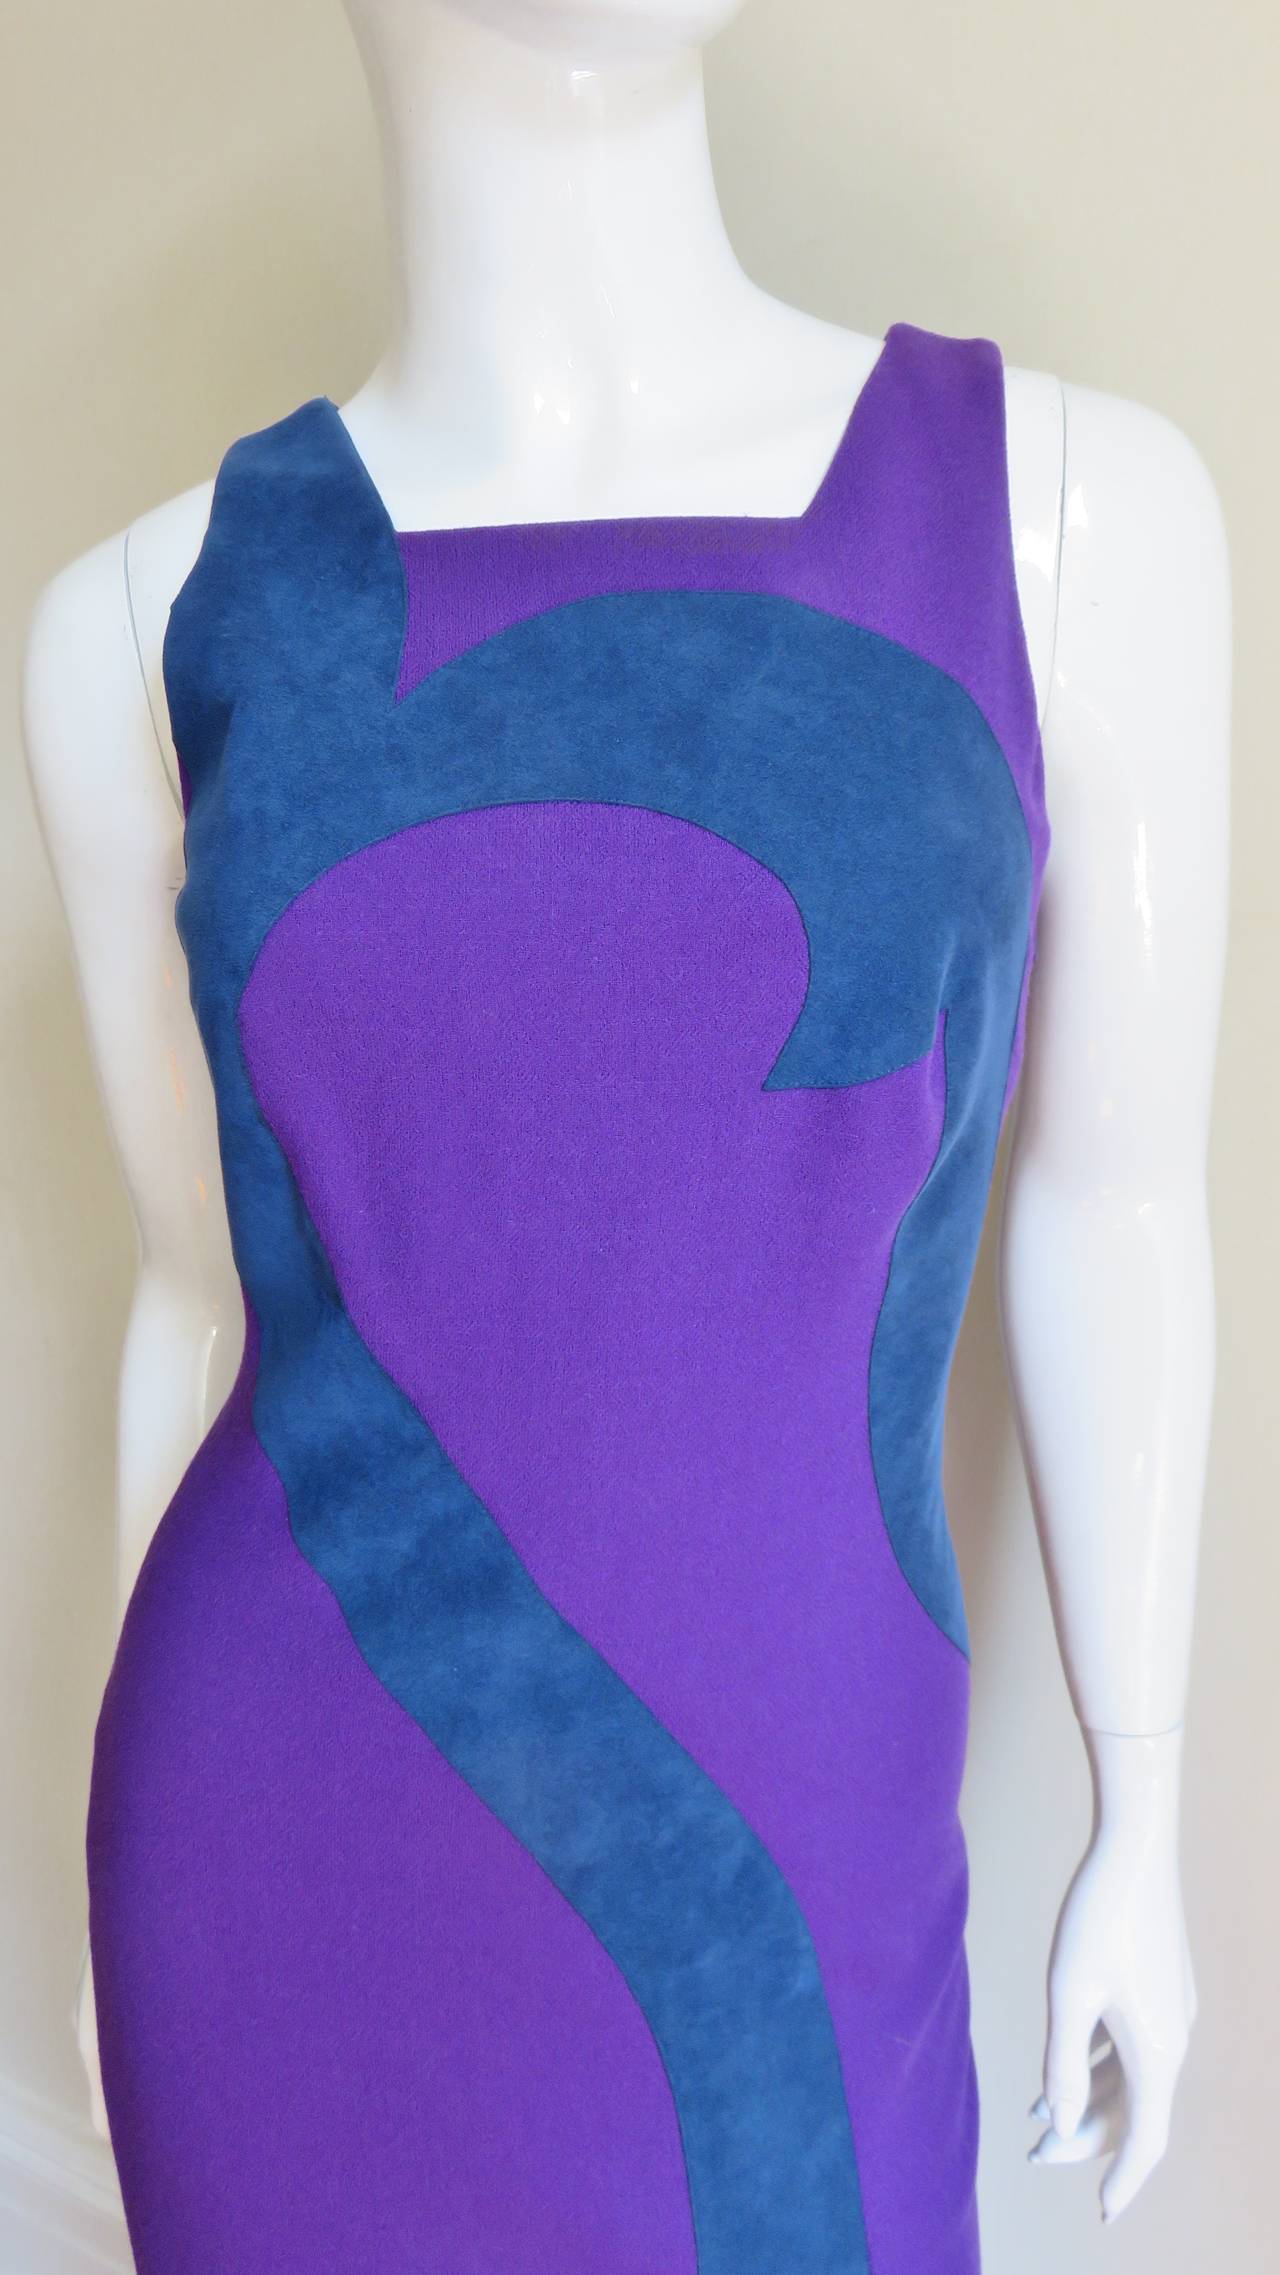 A great dress from Versace in a rich purple wool with a blue ultrasuede abstract desgin inserted across the bust curving down the length of the dress from and back.  It is sleeveless body conscious design with a square neckline and front slit along